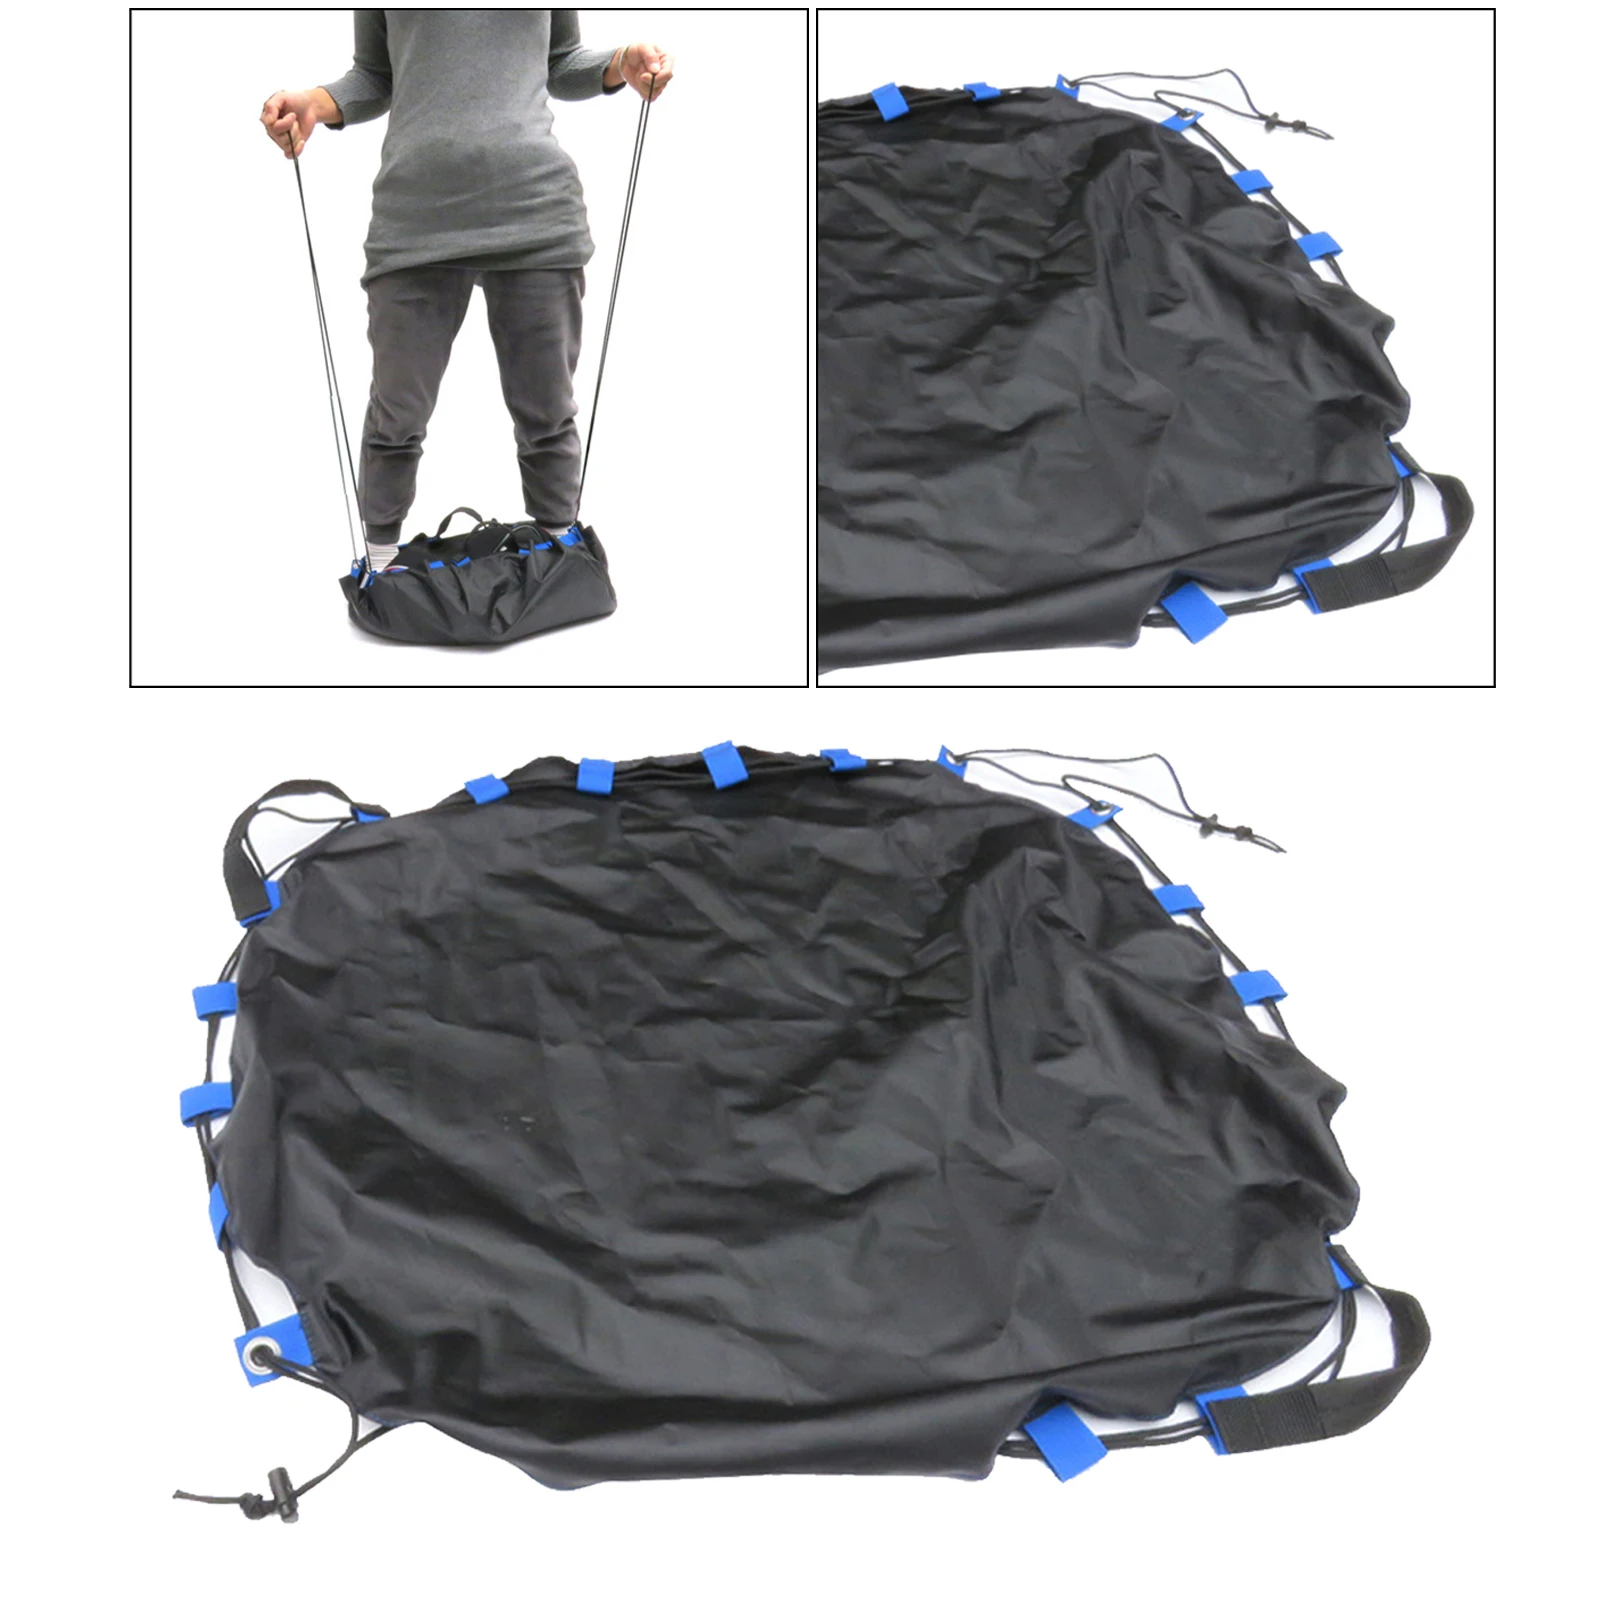 

Waterproof Swimming Wetsuit Change Mat Beach Clothes Changing Carrying Bag with Handle Shoulder Straps for Surfing Kayak